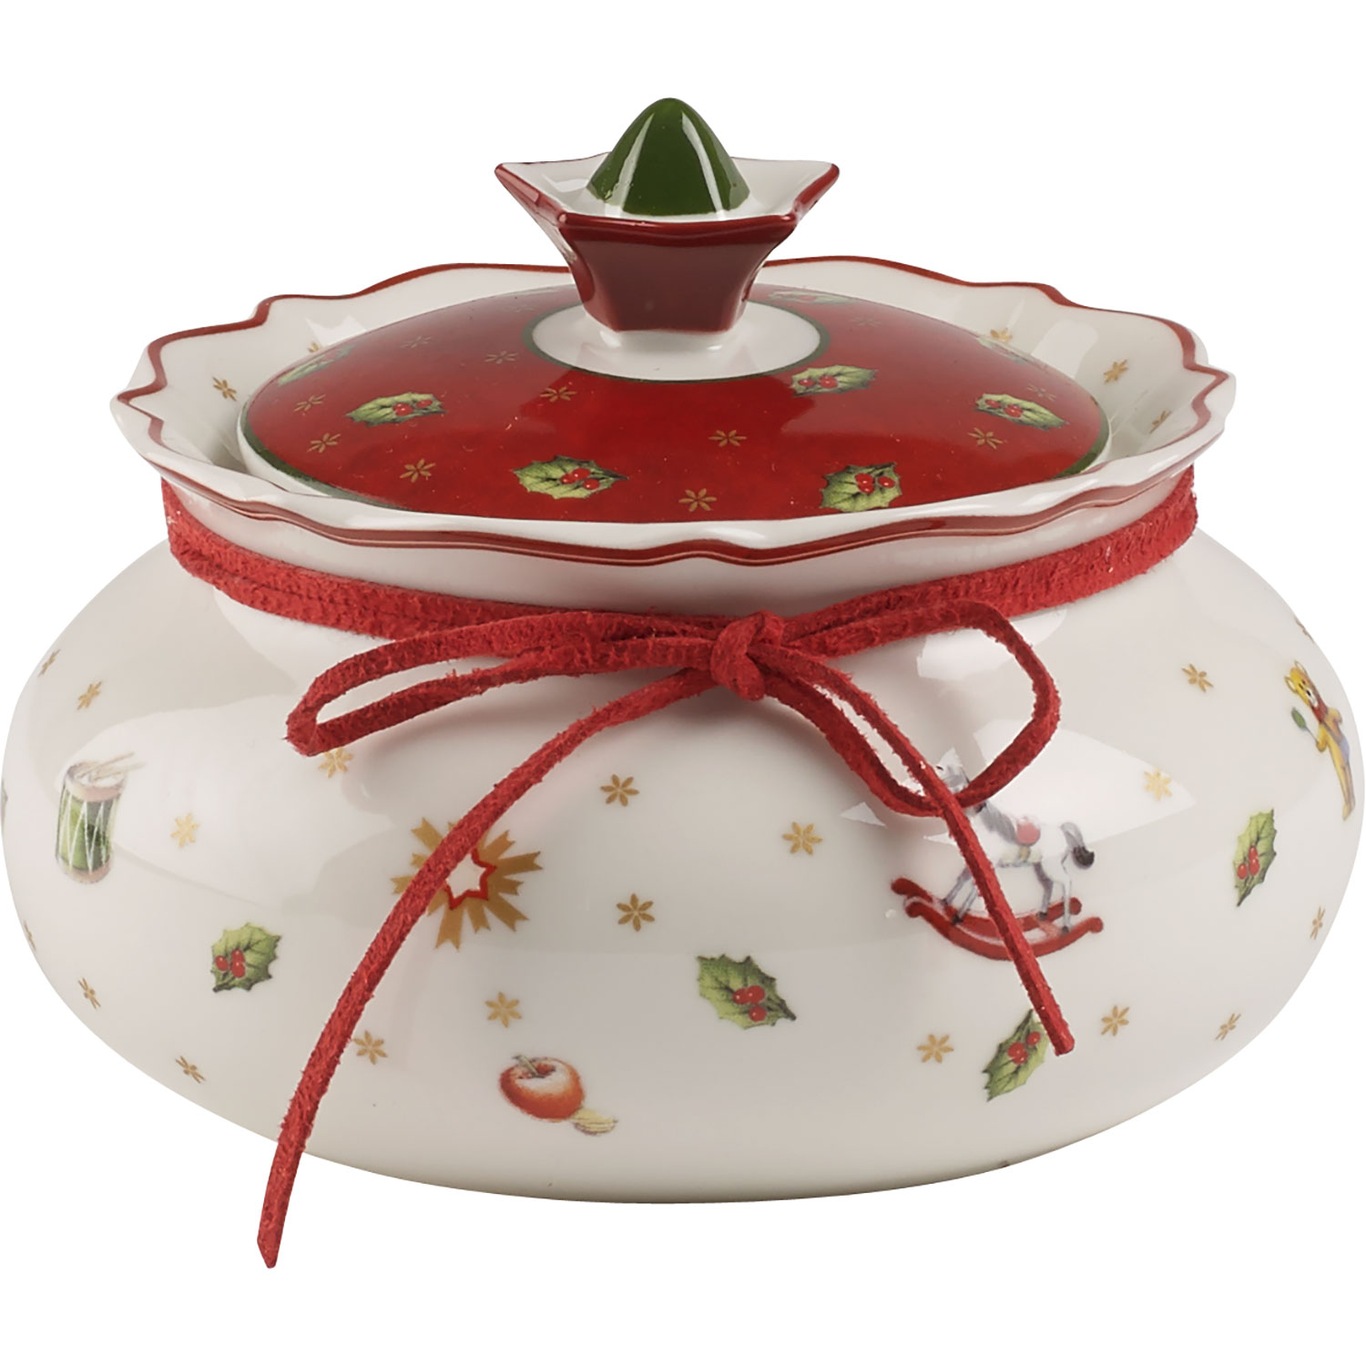 Toy's Delight Jar With Lid, 13.7x10.3x13.7 cm